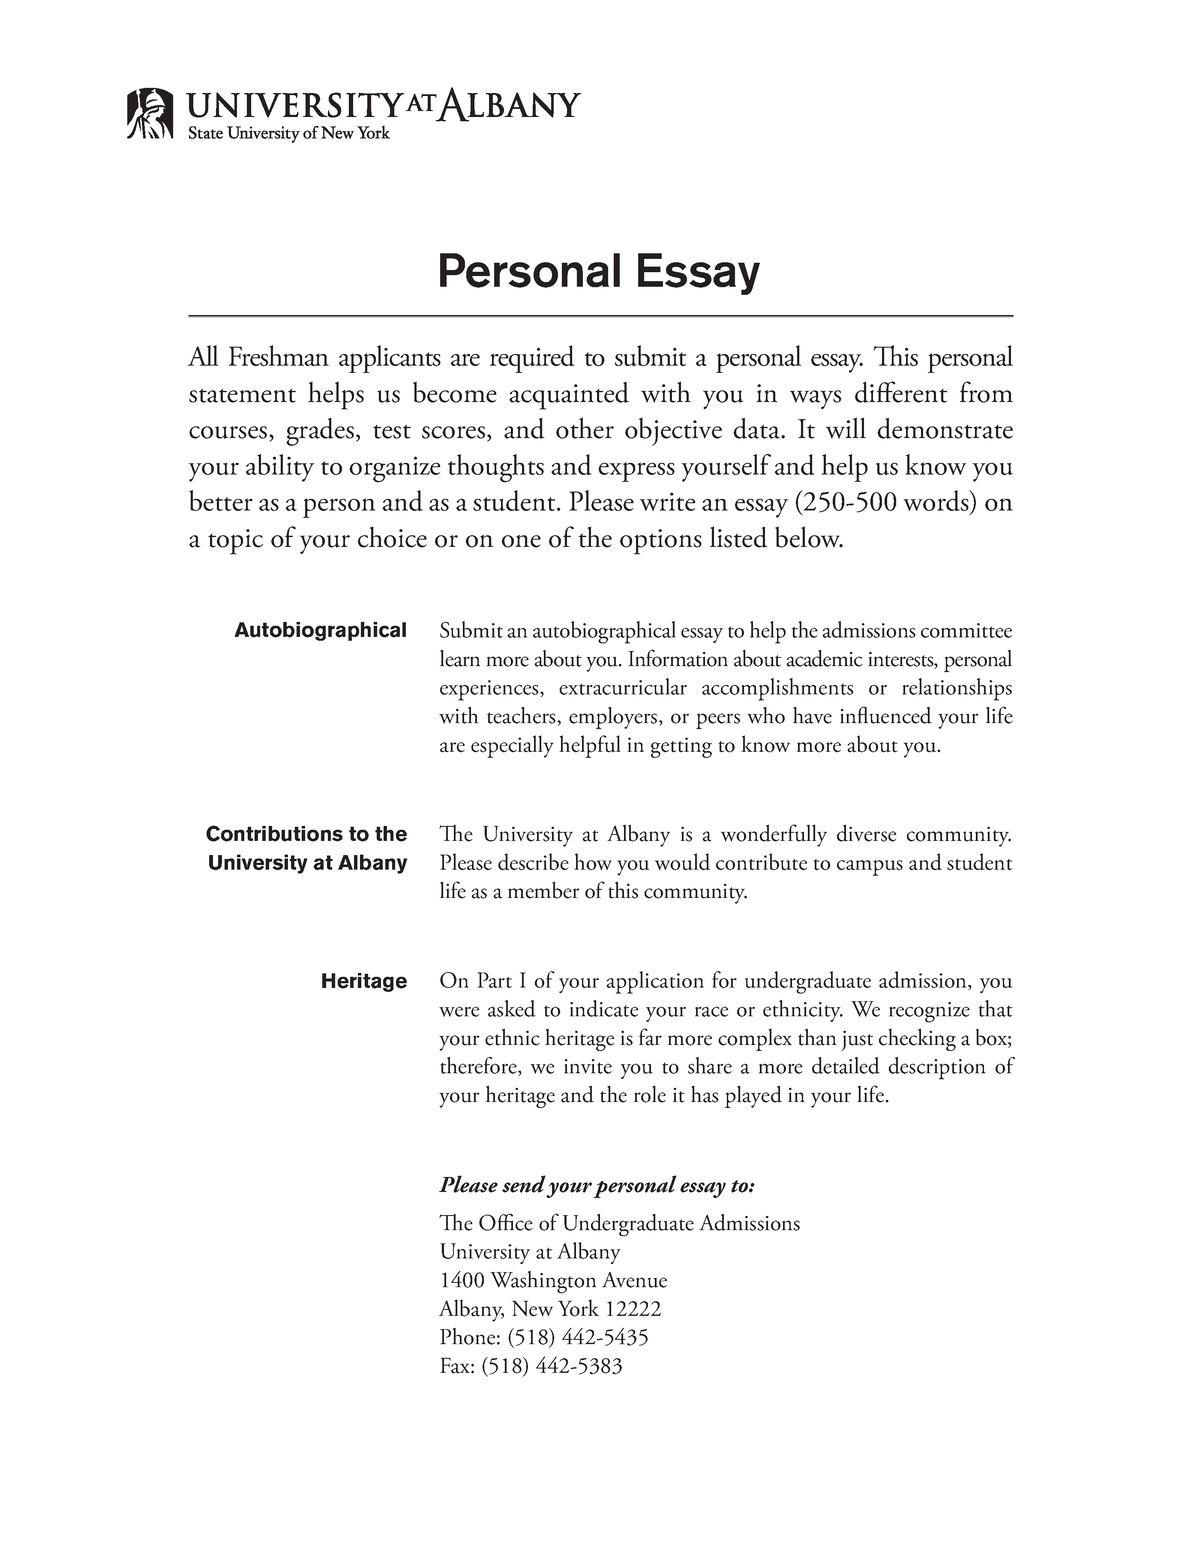 how to write an essay for graduate school application